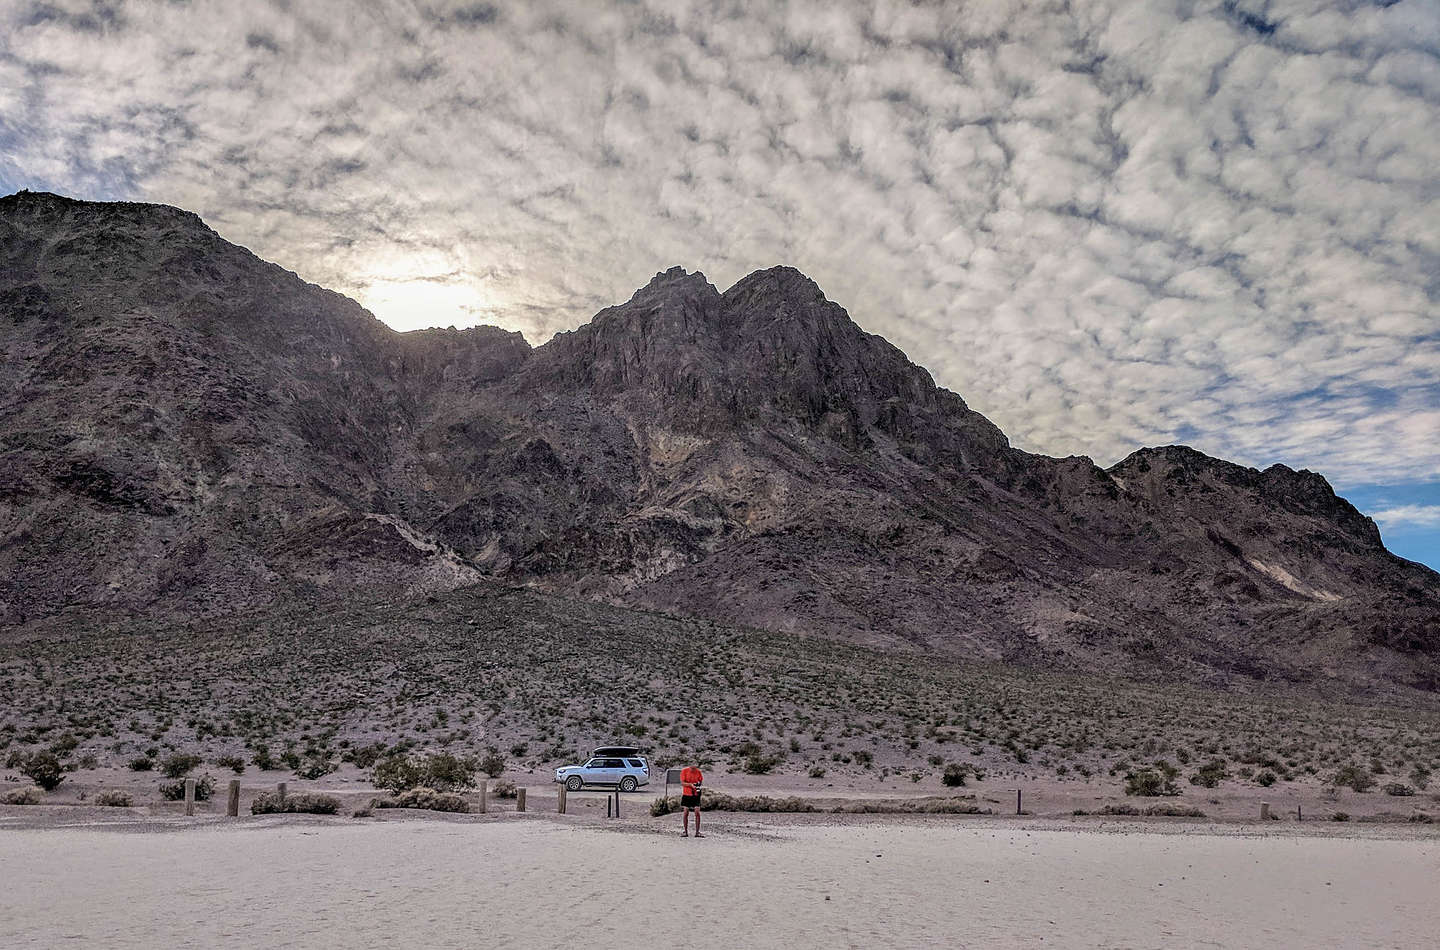 Arriving at the Racetrack Playa Grandstand